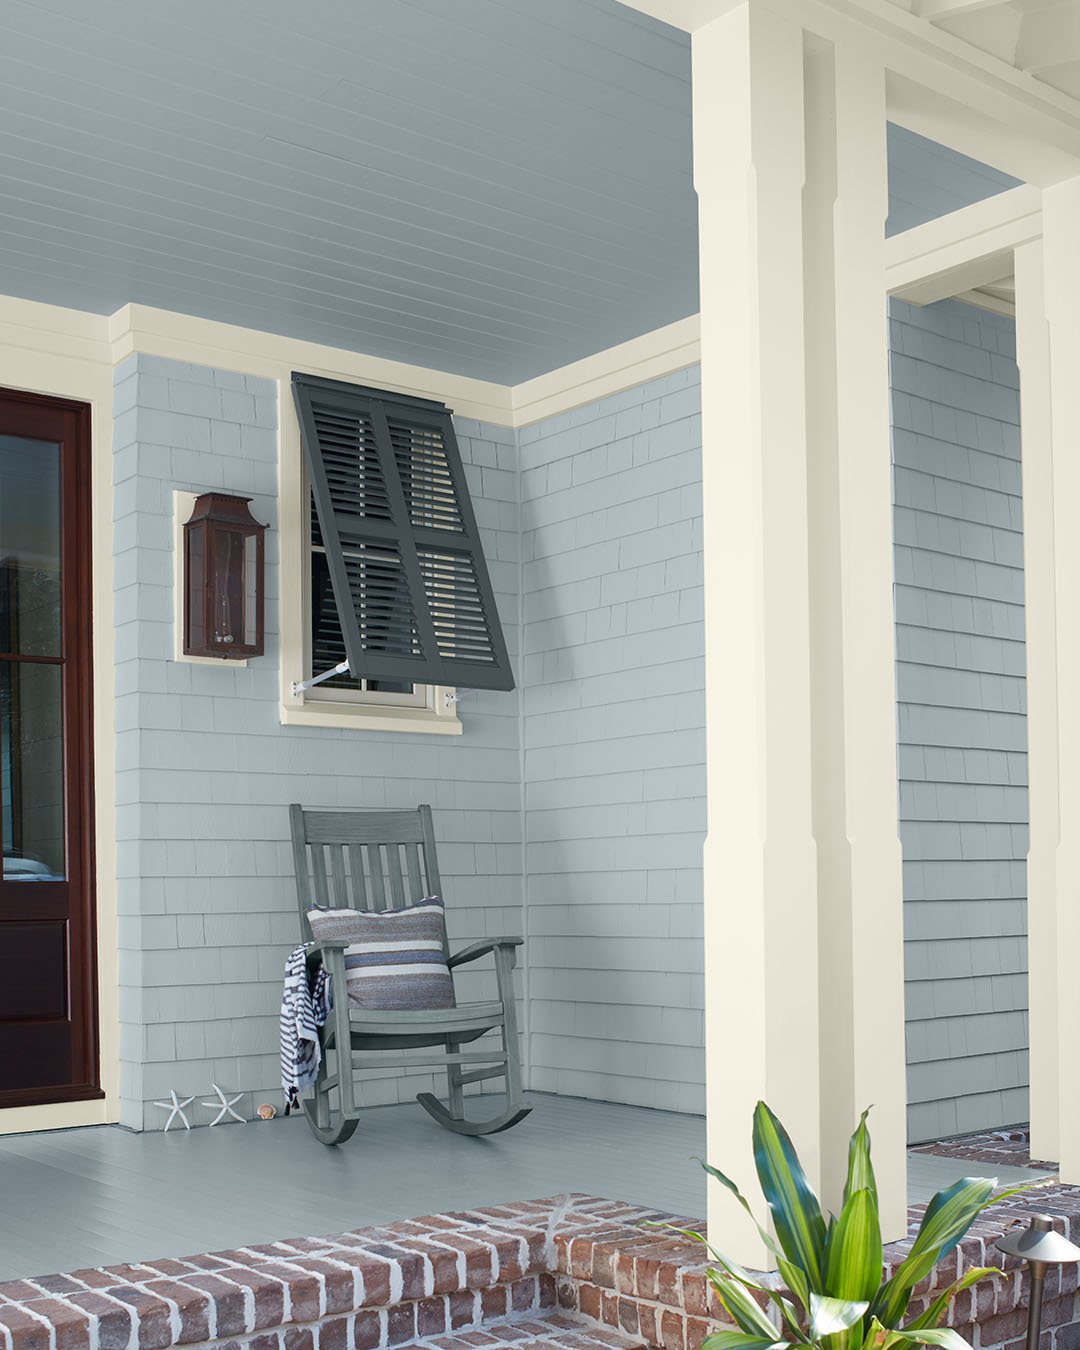 Pale colours and Pastels are back for the spring to bring positive vibes and light into any space, inside and out!

Image 1: (SIDING) Silver Gray 2131-60, Element Guard&reg;, Low Lustre (CEILING) Silver Gray 2131-60, Element Guard, Flat (TRIM) Seashe